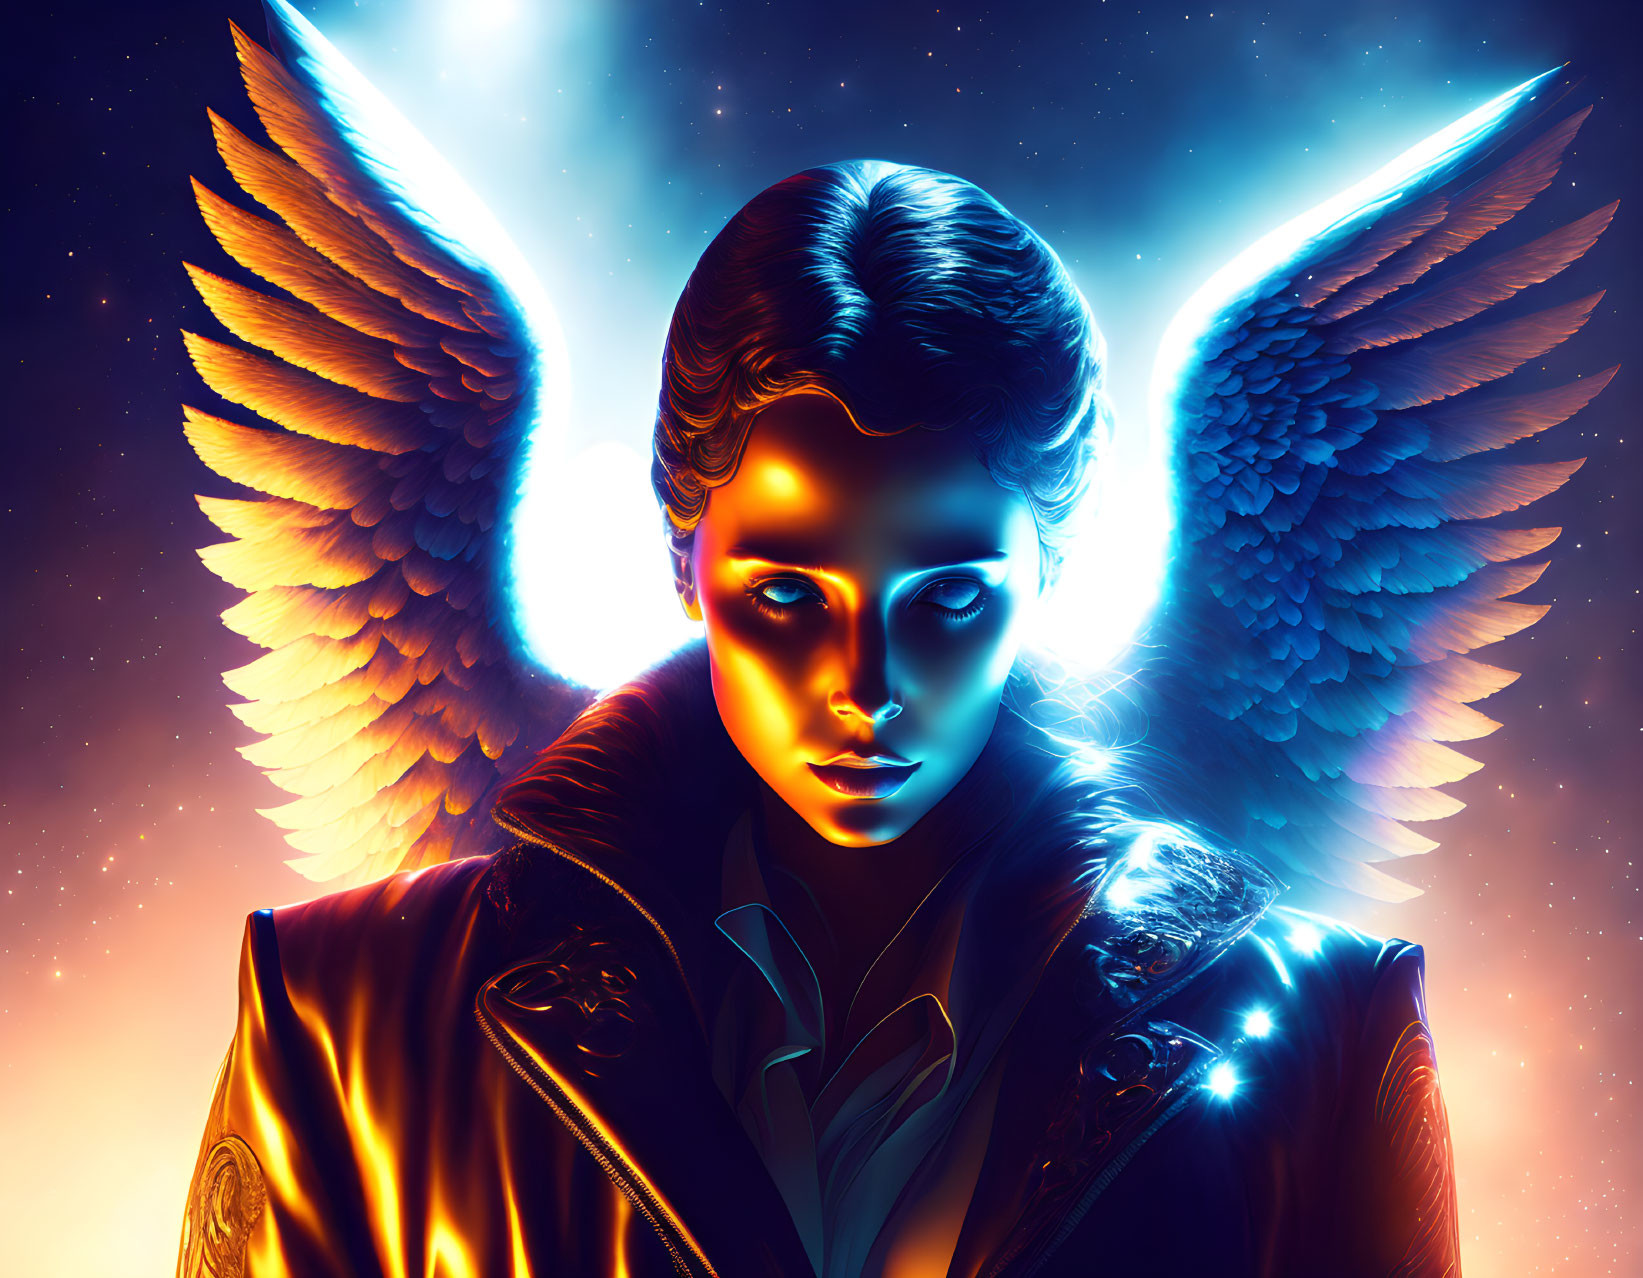 Luminescent angelic figure with glowing eyes and wings in cosmic setting